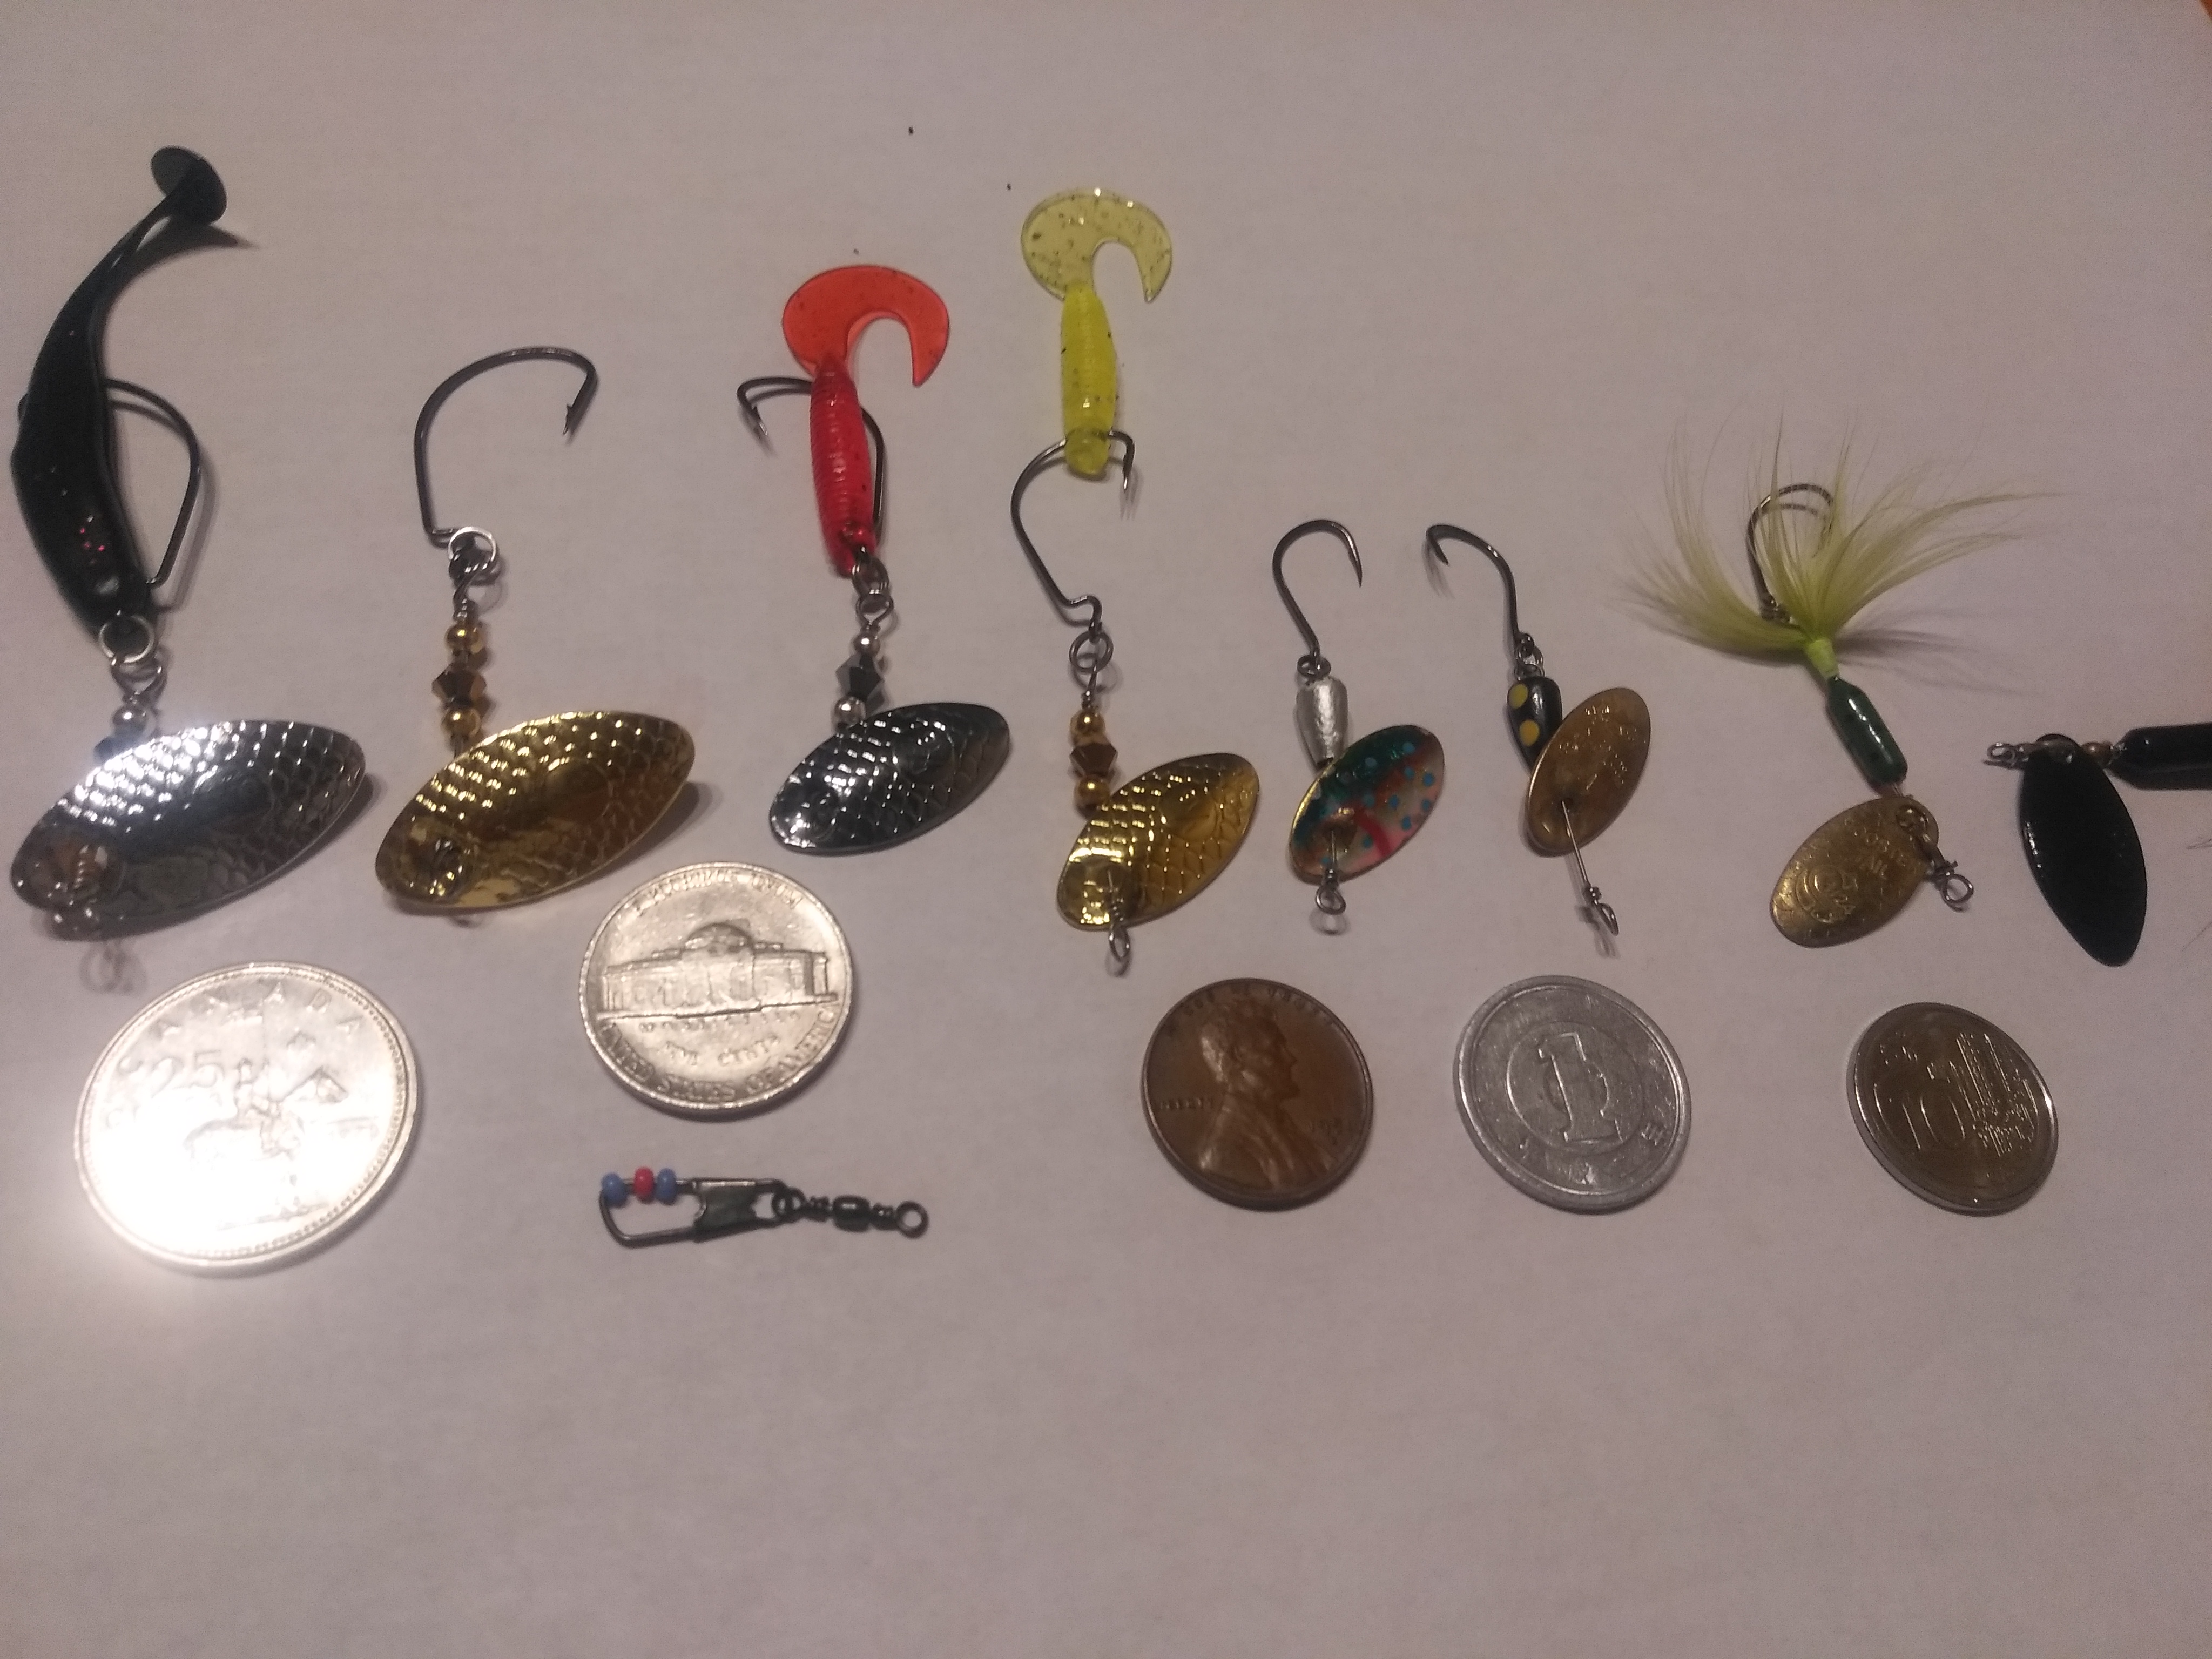 Tips on making small luers for trout, in rivers and creeks - Wire